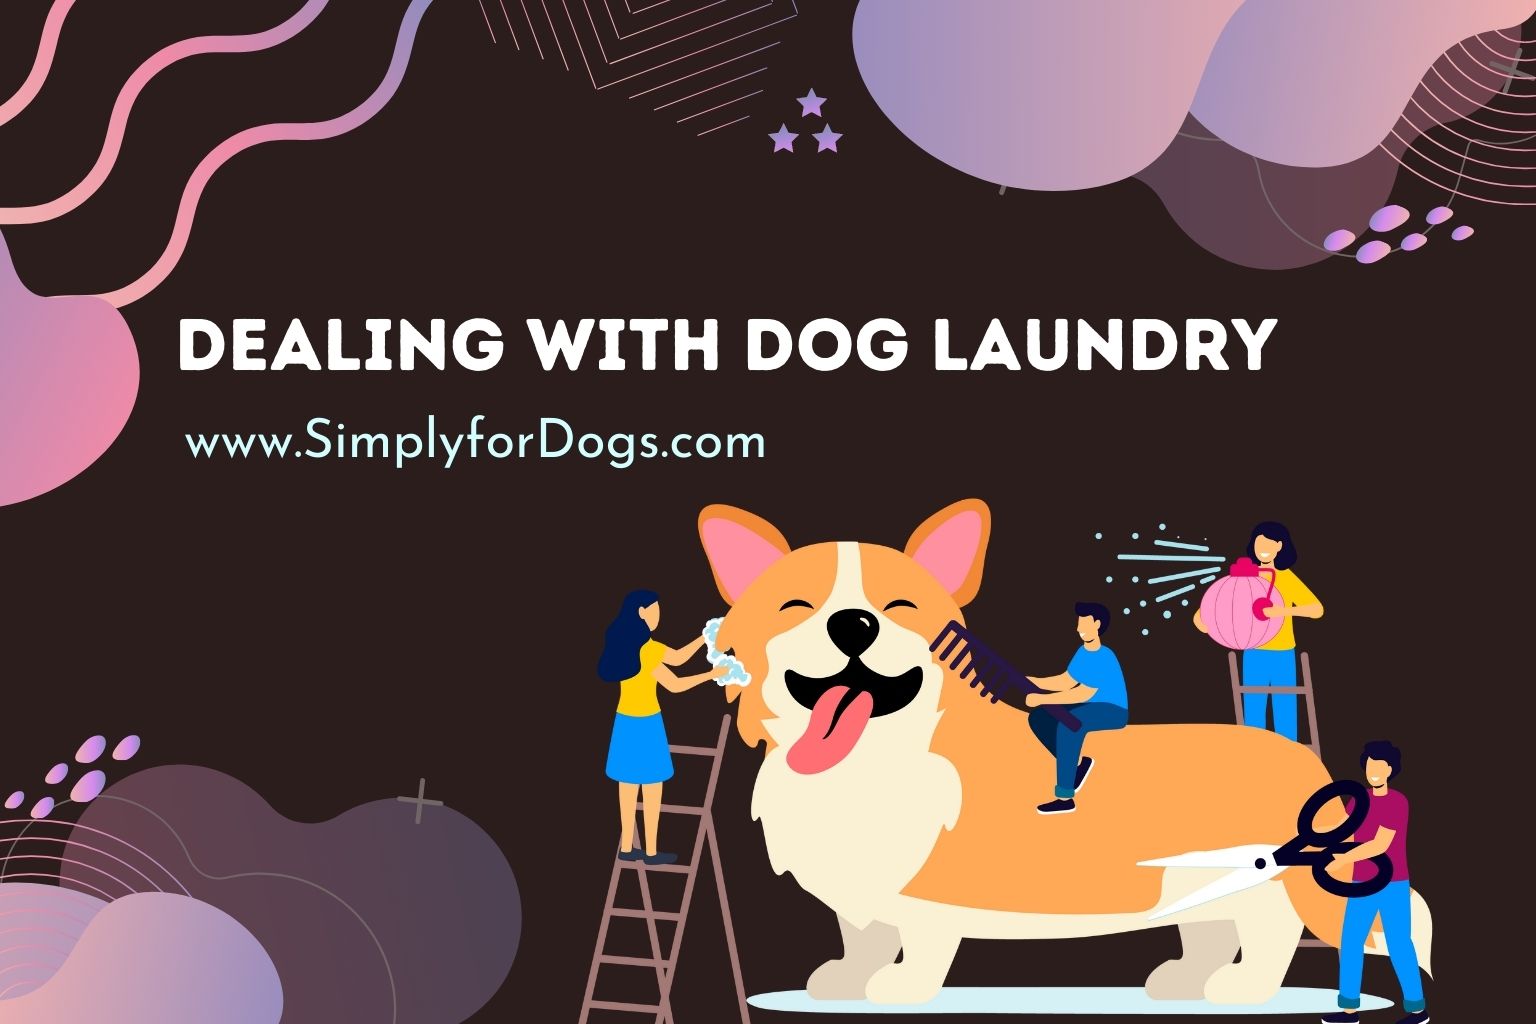 Dealing with Dog Laundry